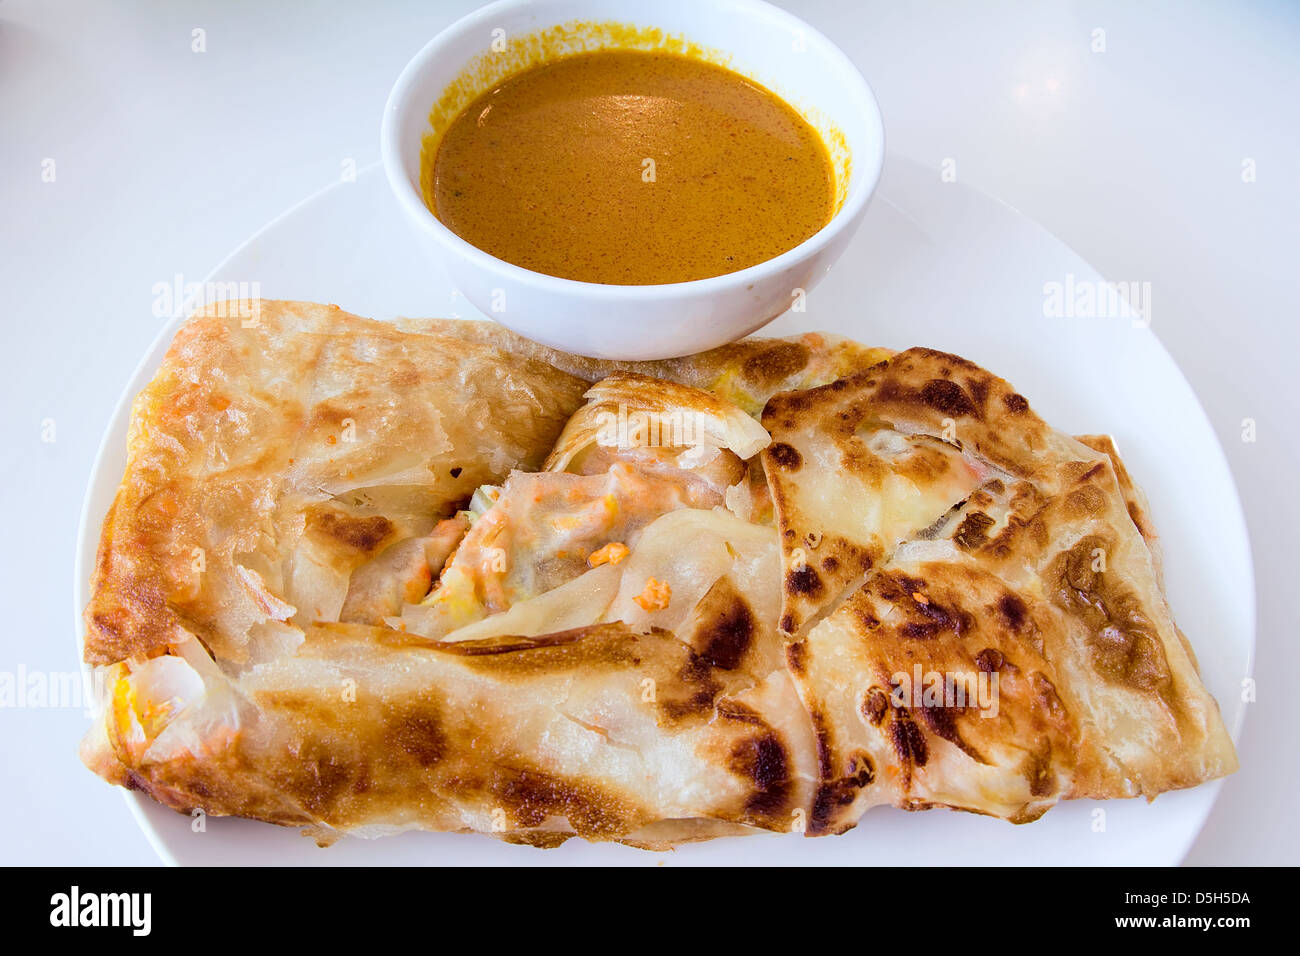 Indian Roti Prata with Chicken Meat and Curry Sauce Stock Photo